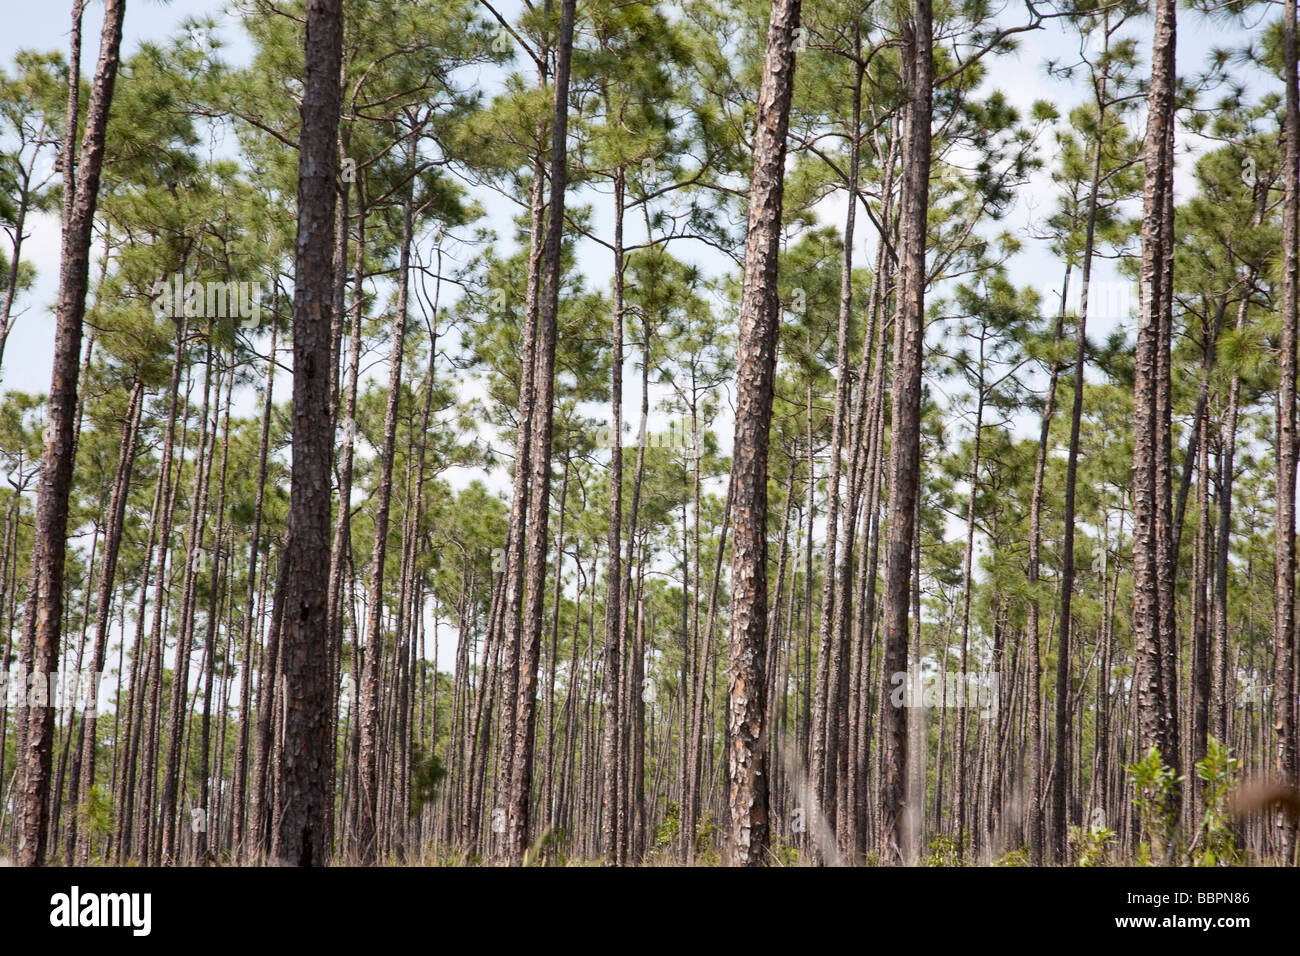 A forest of long pine trees near the eastern edge of the Everglades National Park in Florida is aptly named 'Long Pine Key.' Stock Photo